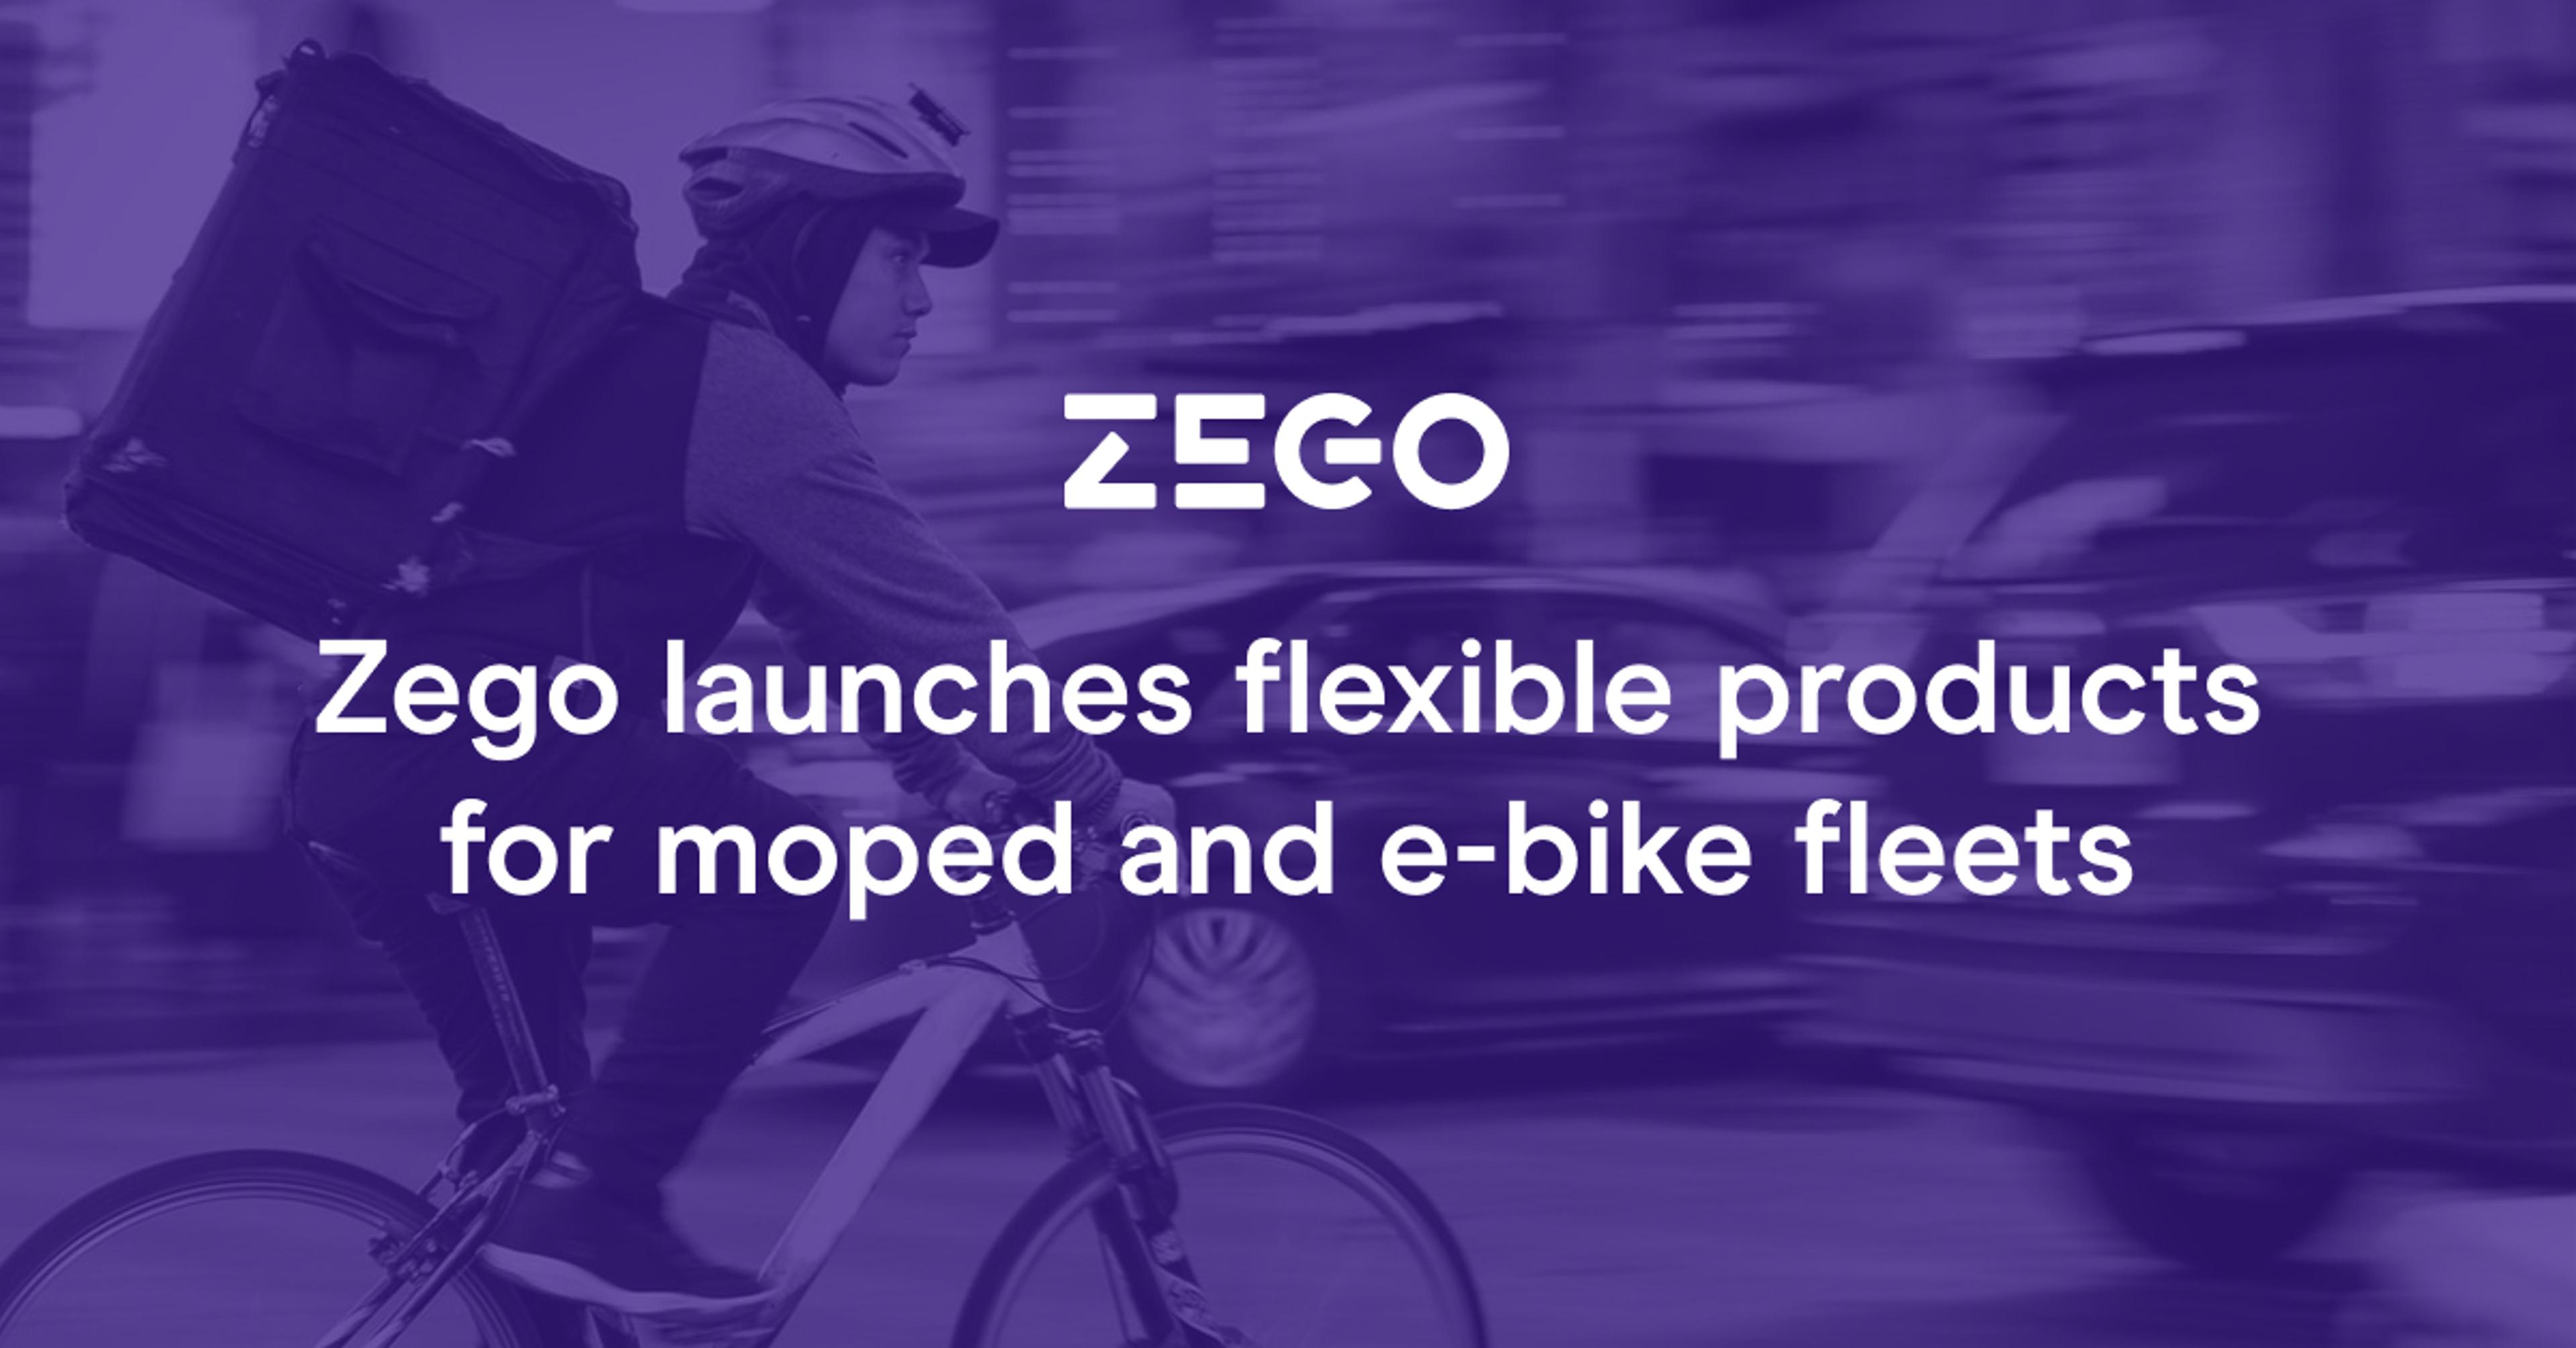 Zego launches flexible products for moped and e-bike fleets